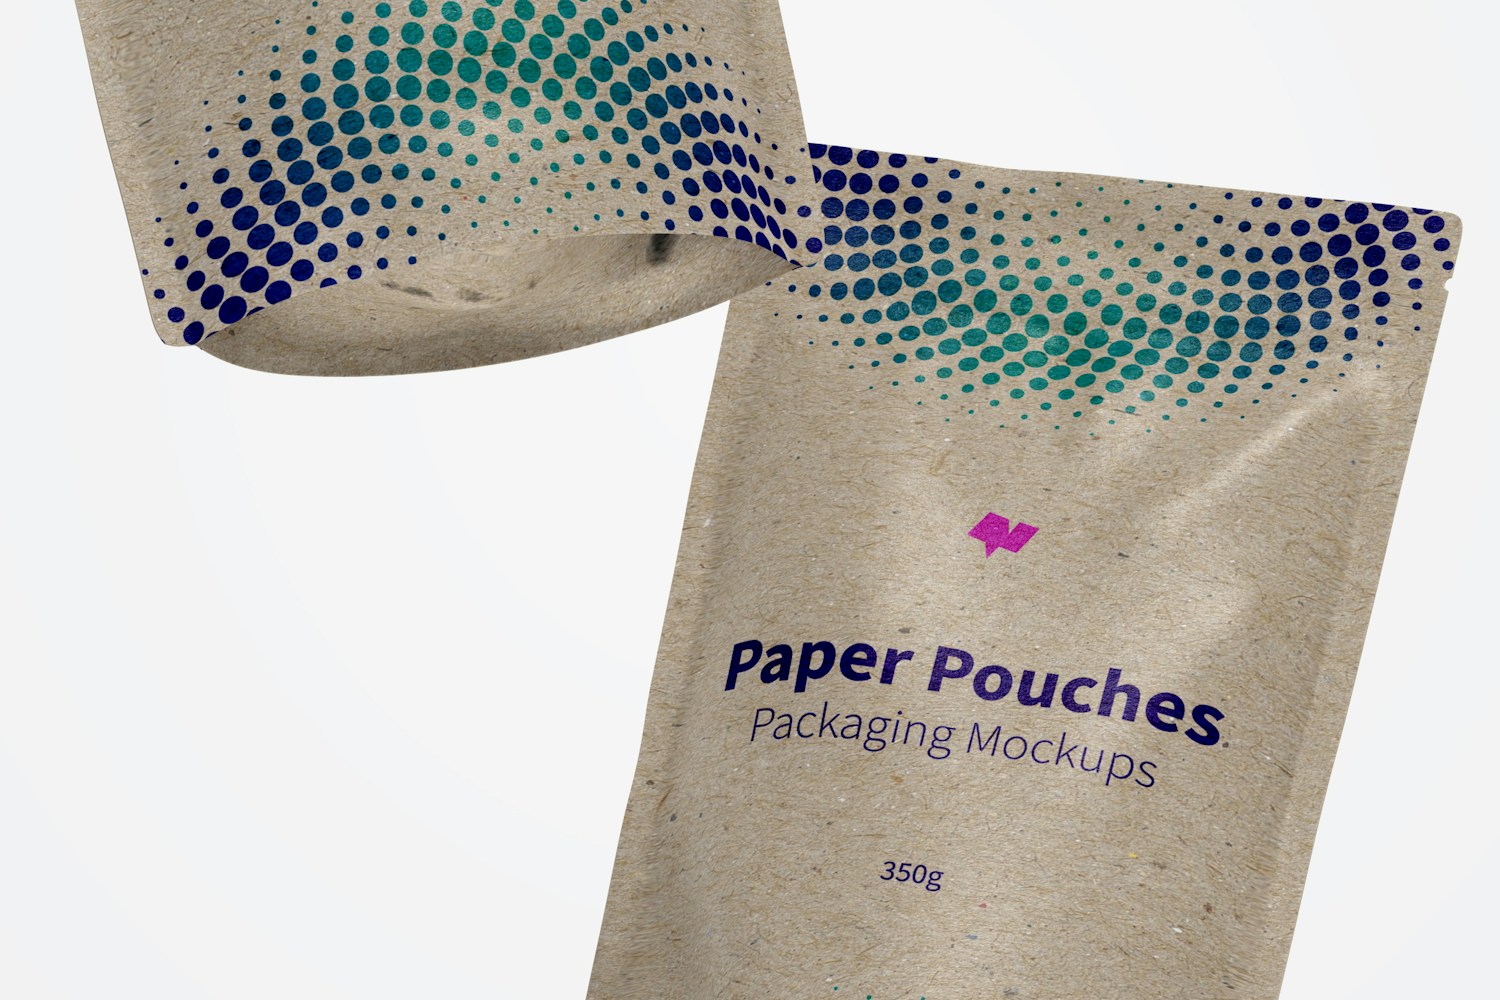 Paper Pouches Packaging Mockup, Floating